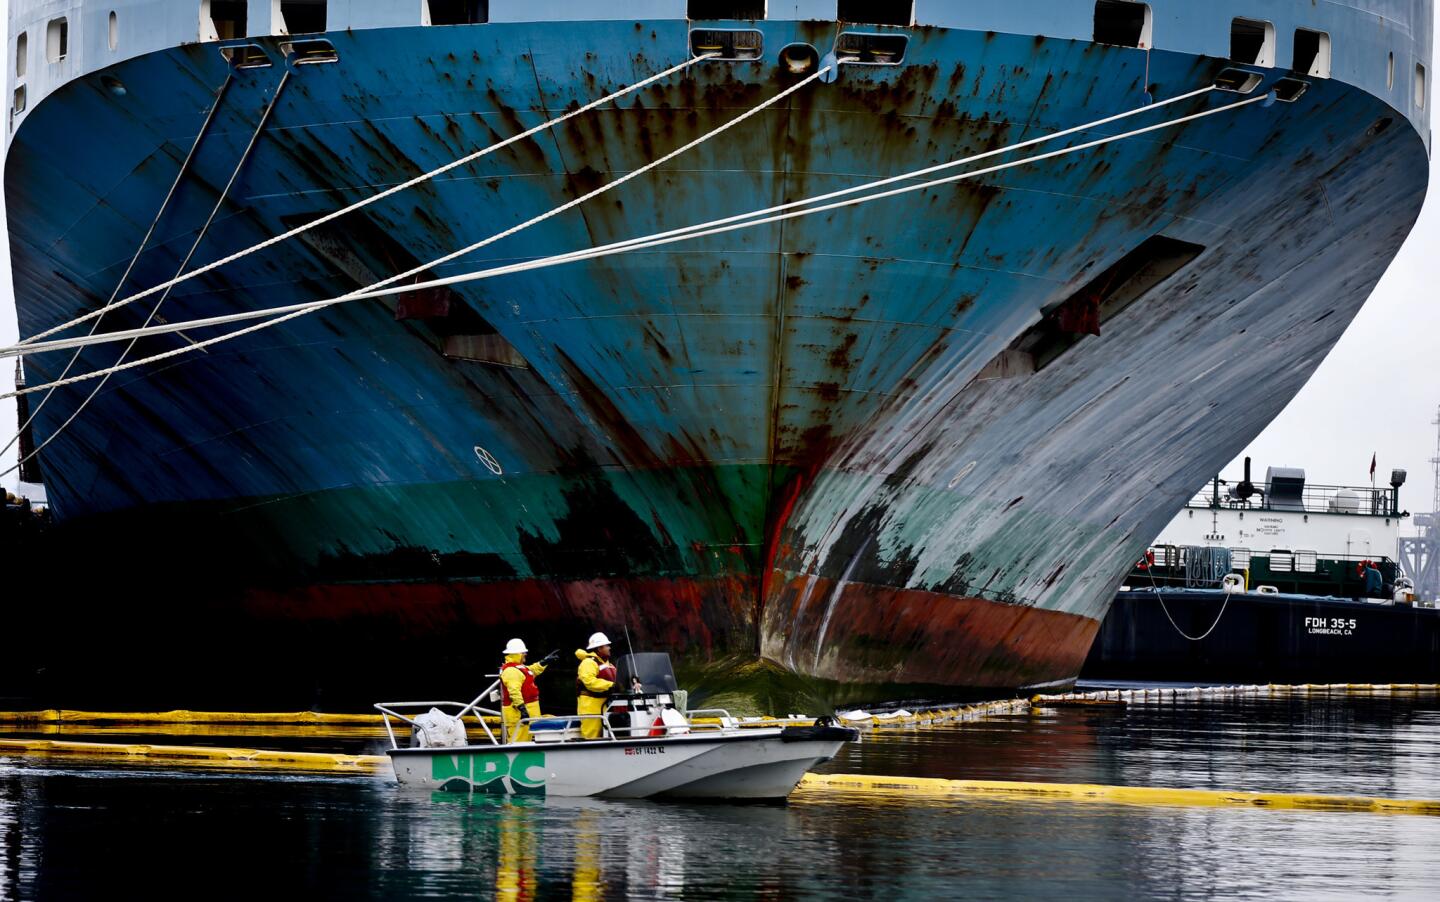 Clean-up crews using absorbent booms try to contain an oil spill leaked from a cargo ship at the Port of Los Angeles.